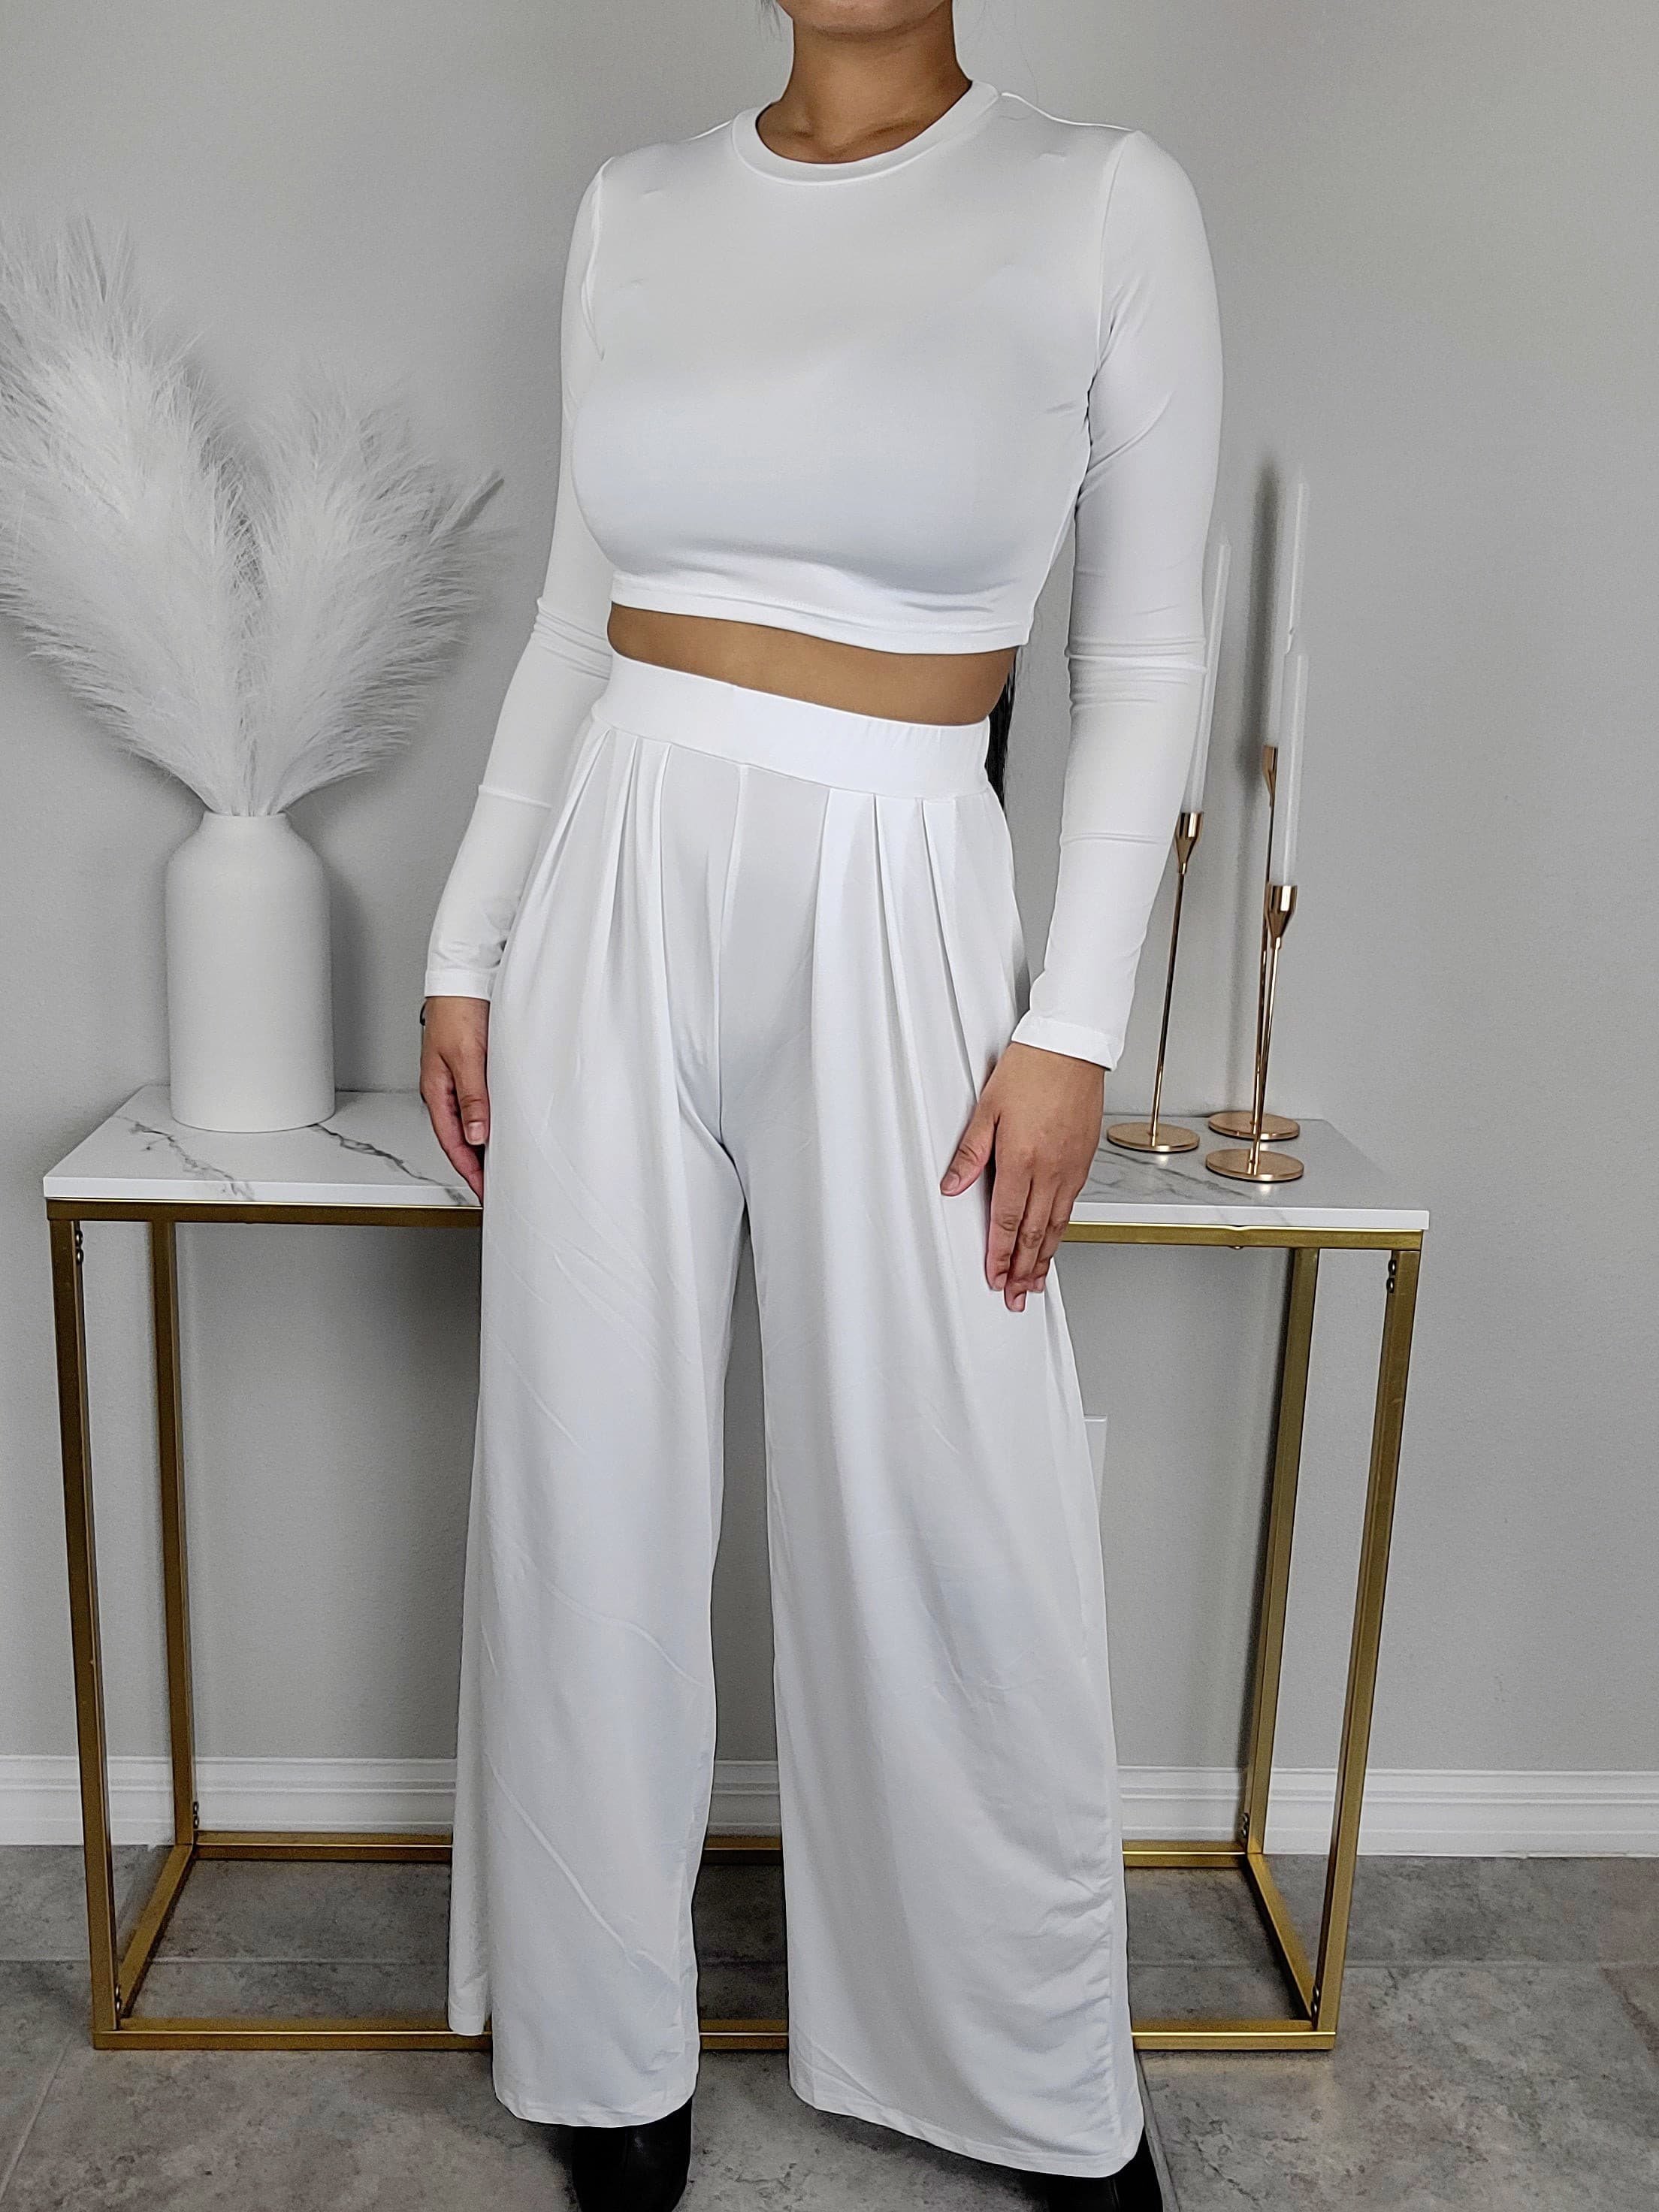 I Want To Live In These Satin Pants (And You Will Too) - The Mom Edit